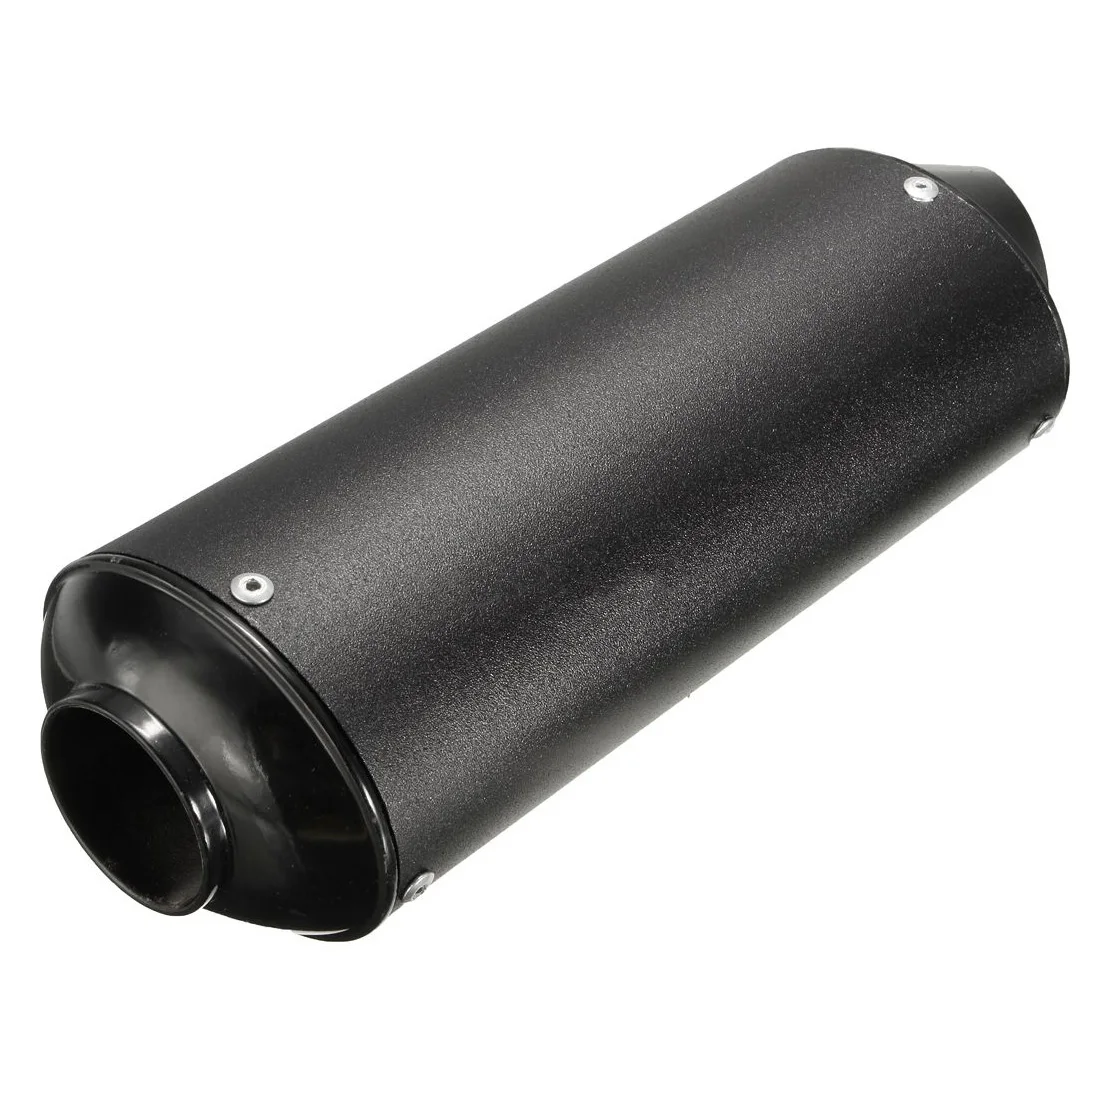 Motorcycle Racing Exhaust Muffler Silencer For 125 150 160cc Dirt Pit